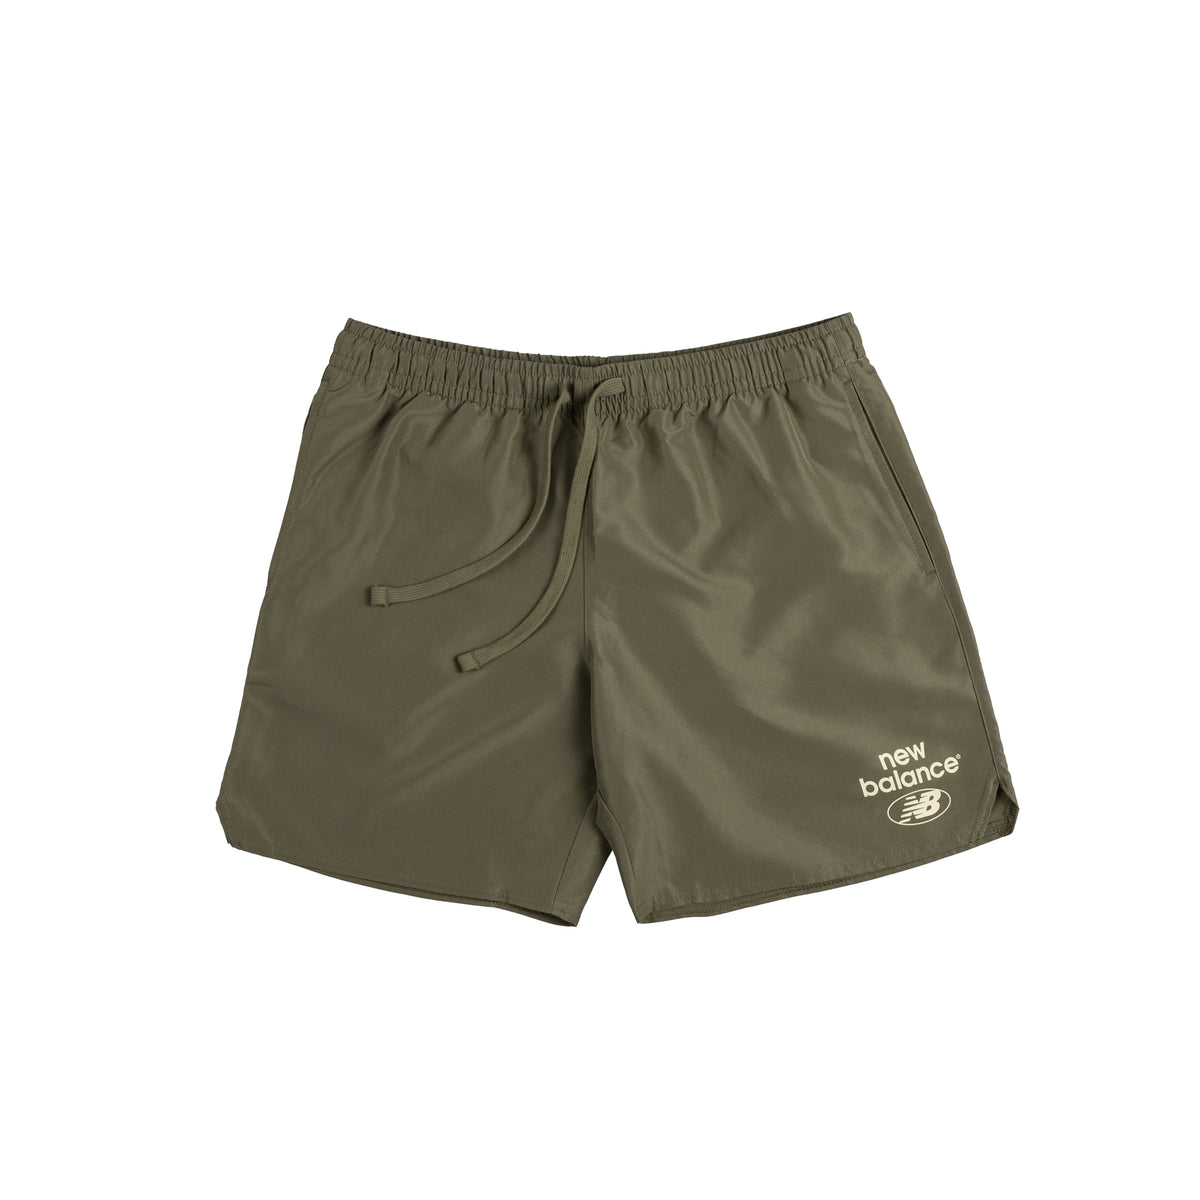 New Balance Essentials Woven Shorts – buy now at Asphaltgold Online Store!